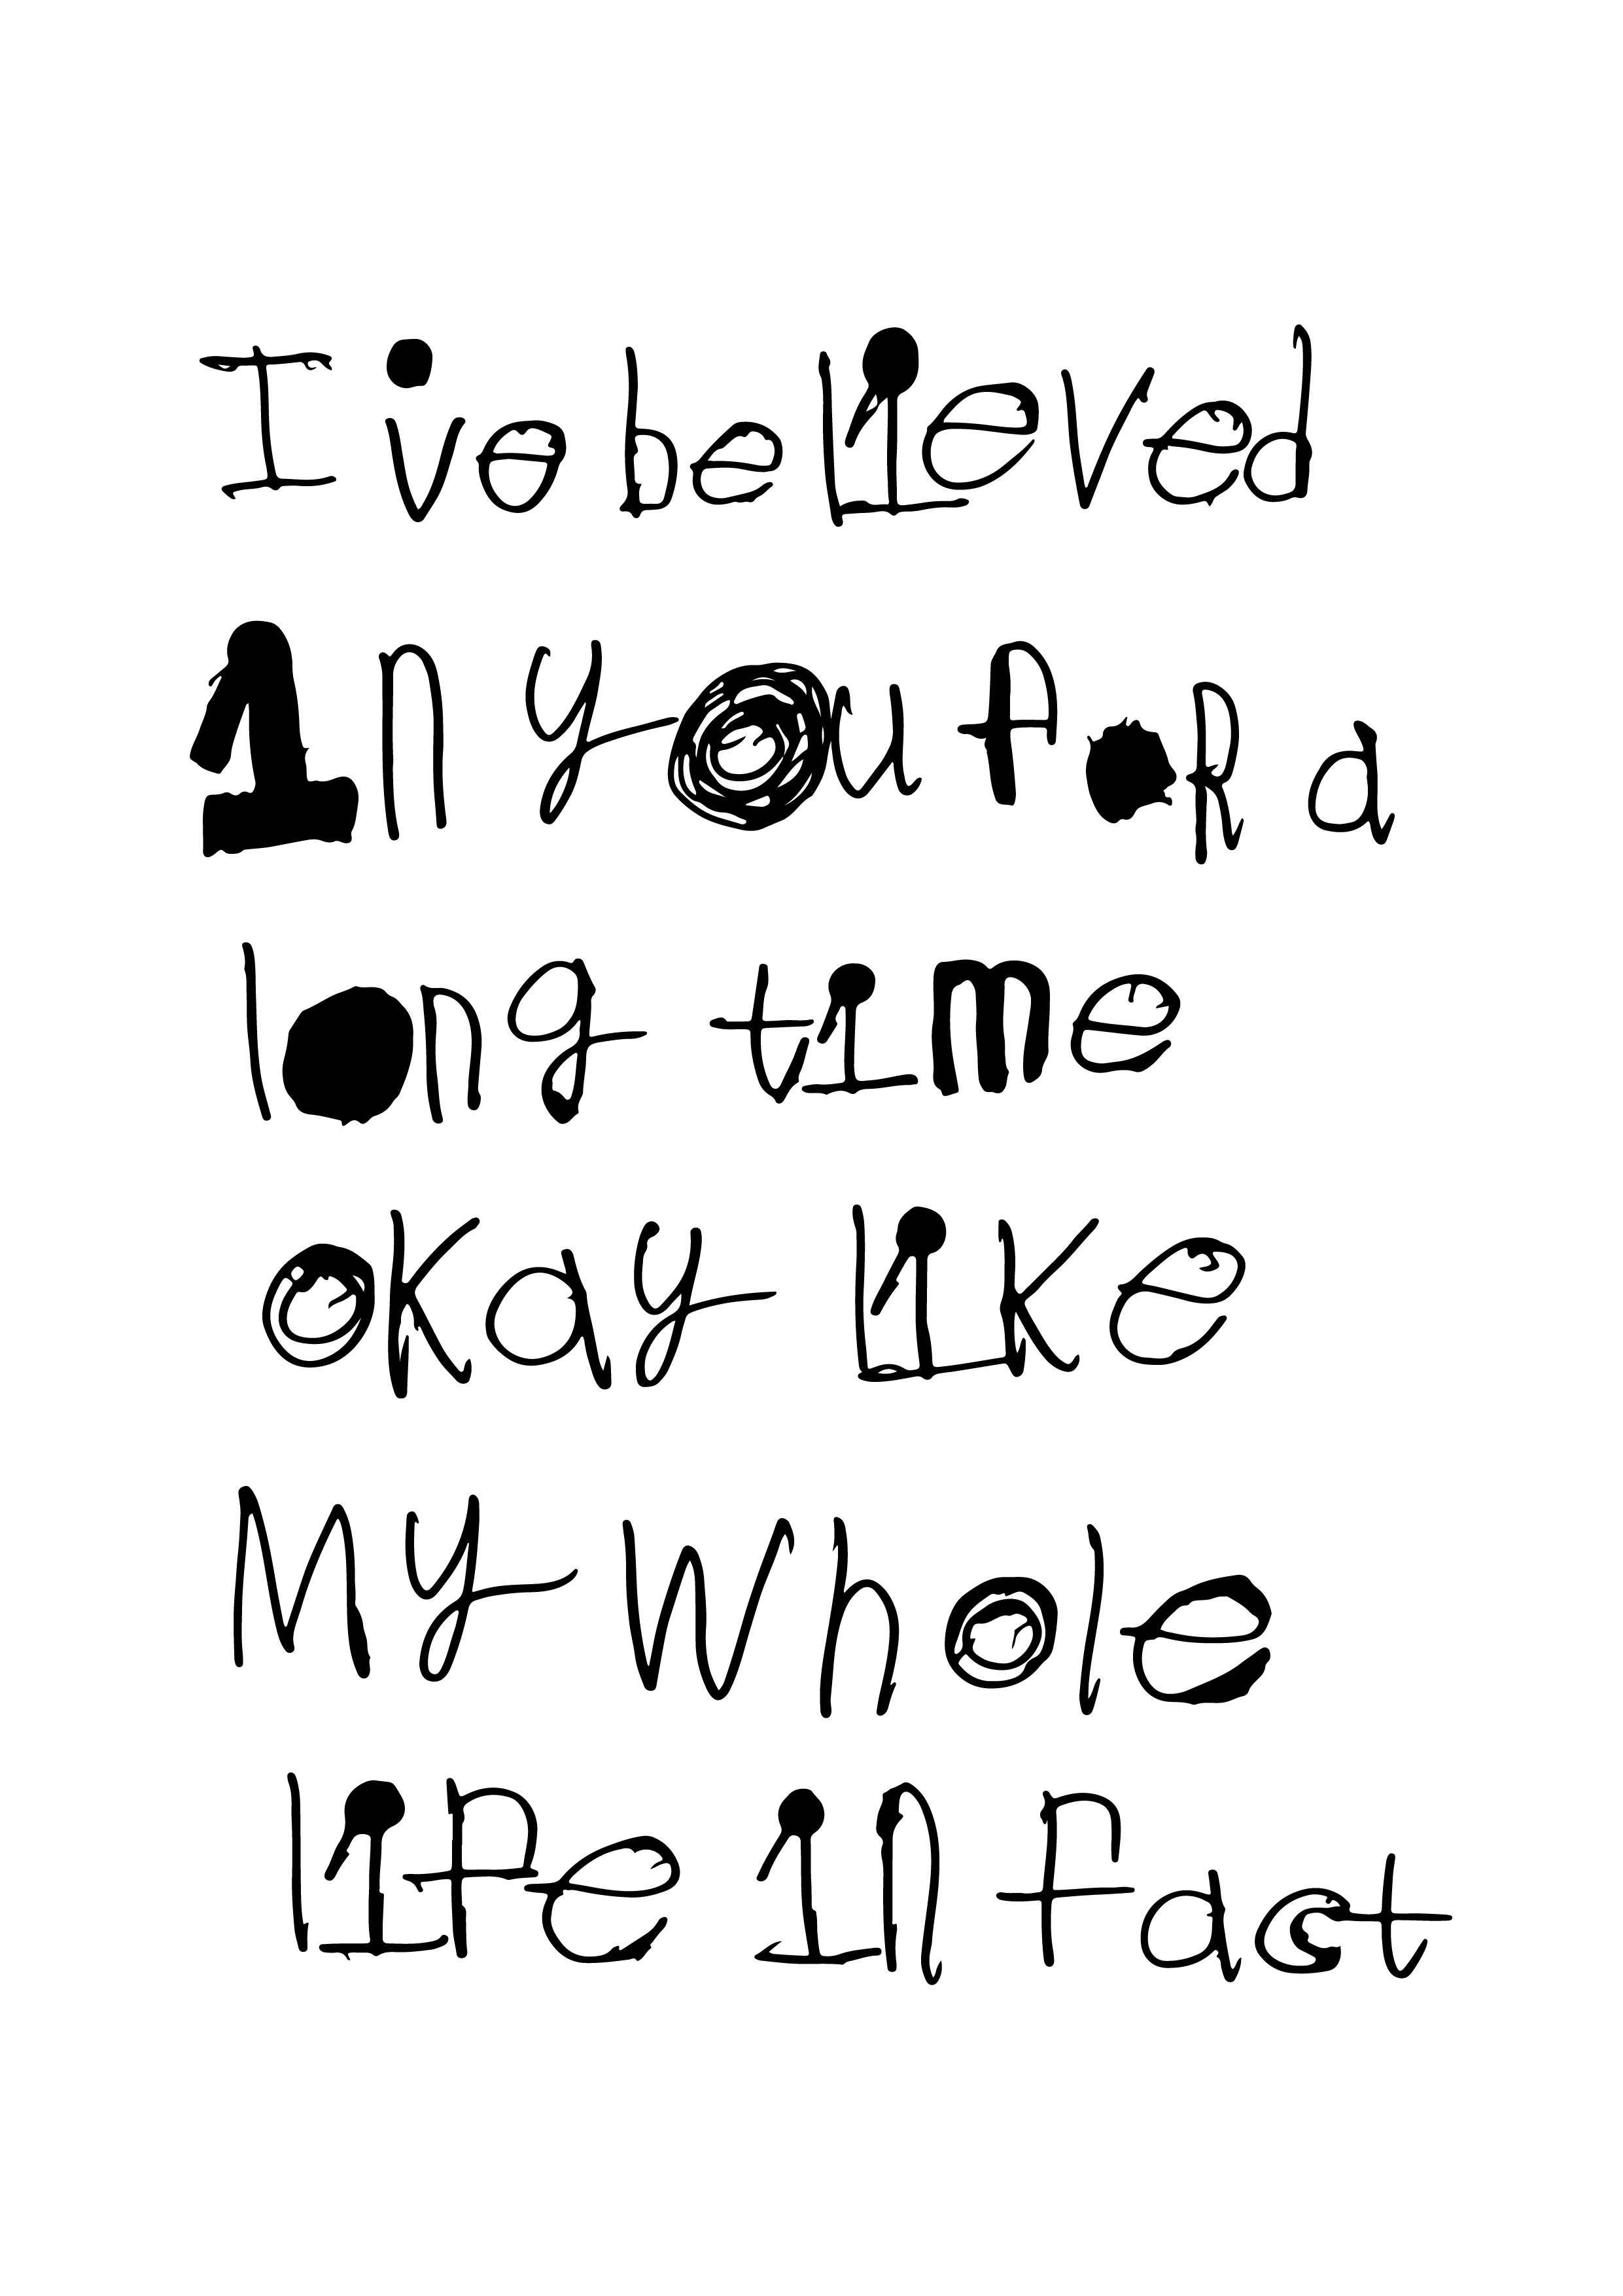 Handwritten note by Piper in her unique font. Piper uses a mix of lower and upper case letters ion her words and likes to colour in large dots and full stops. the black writing on a white background is in the centre and fills the whole page.